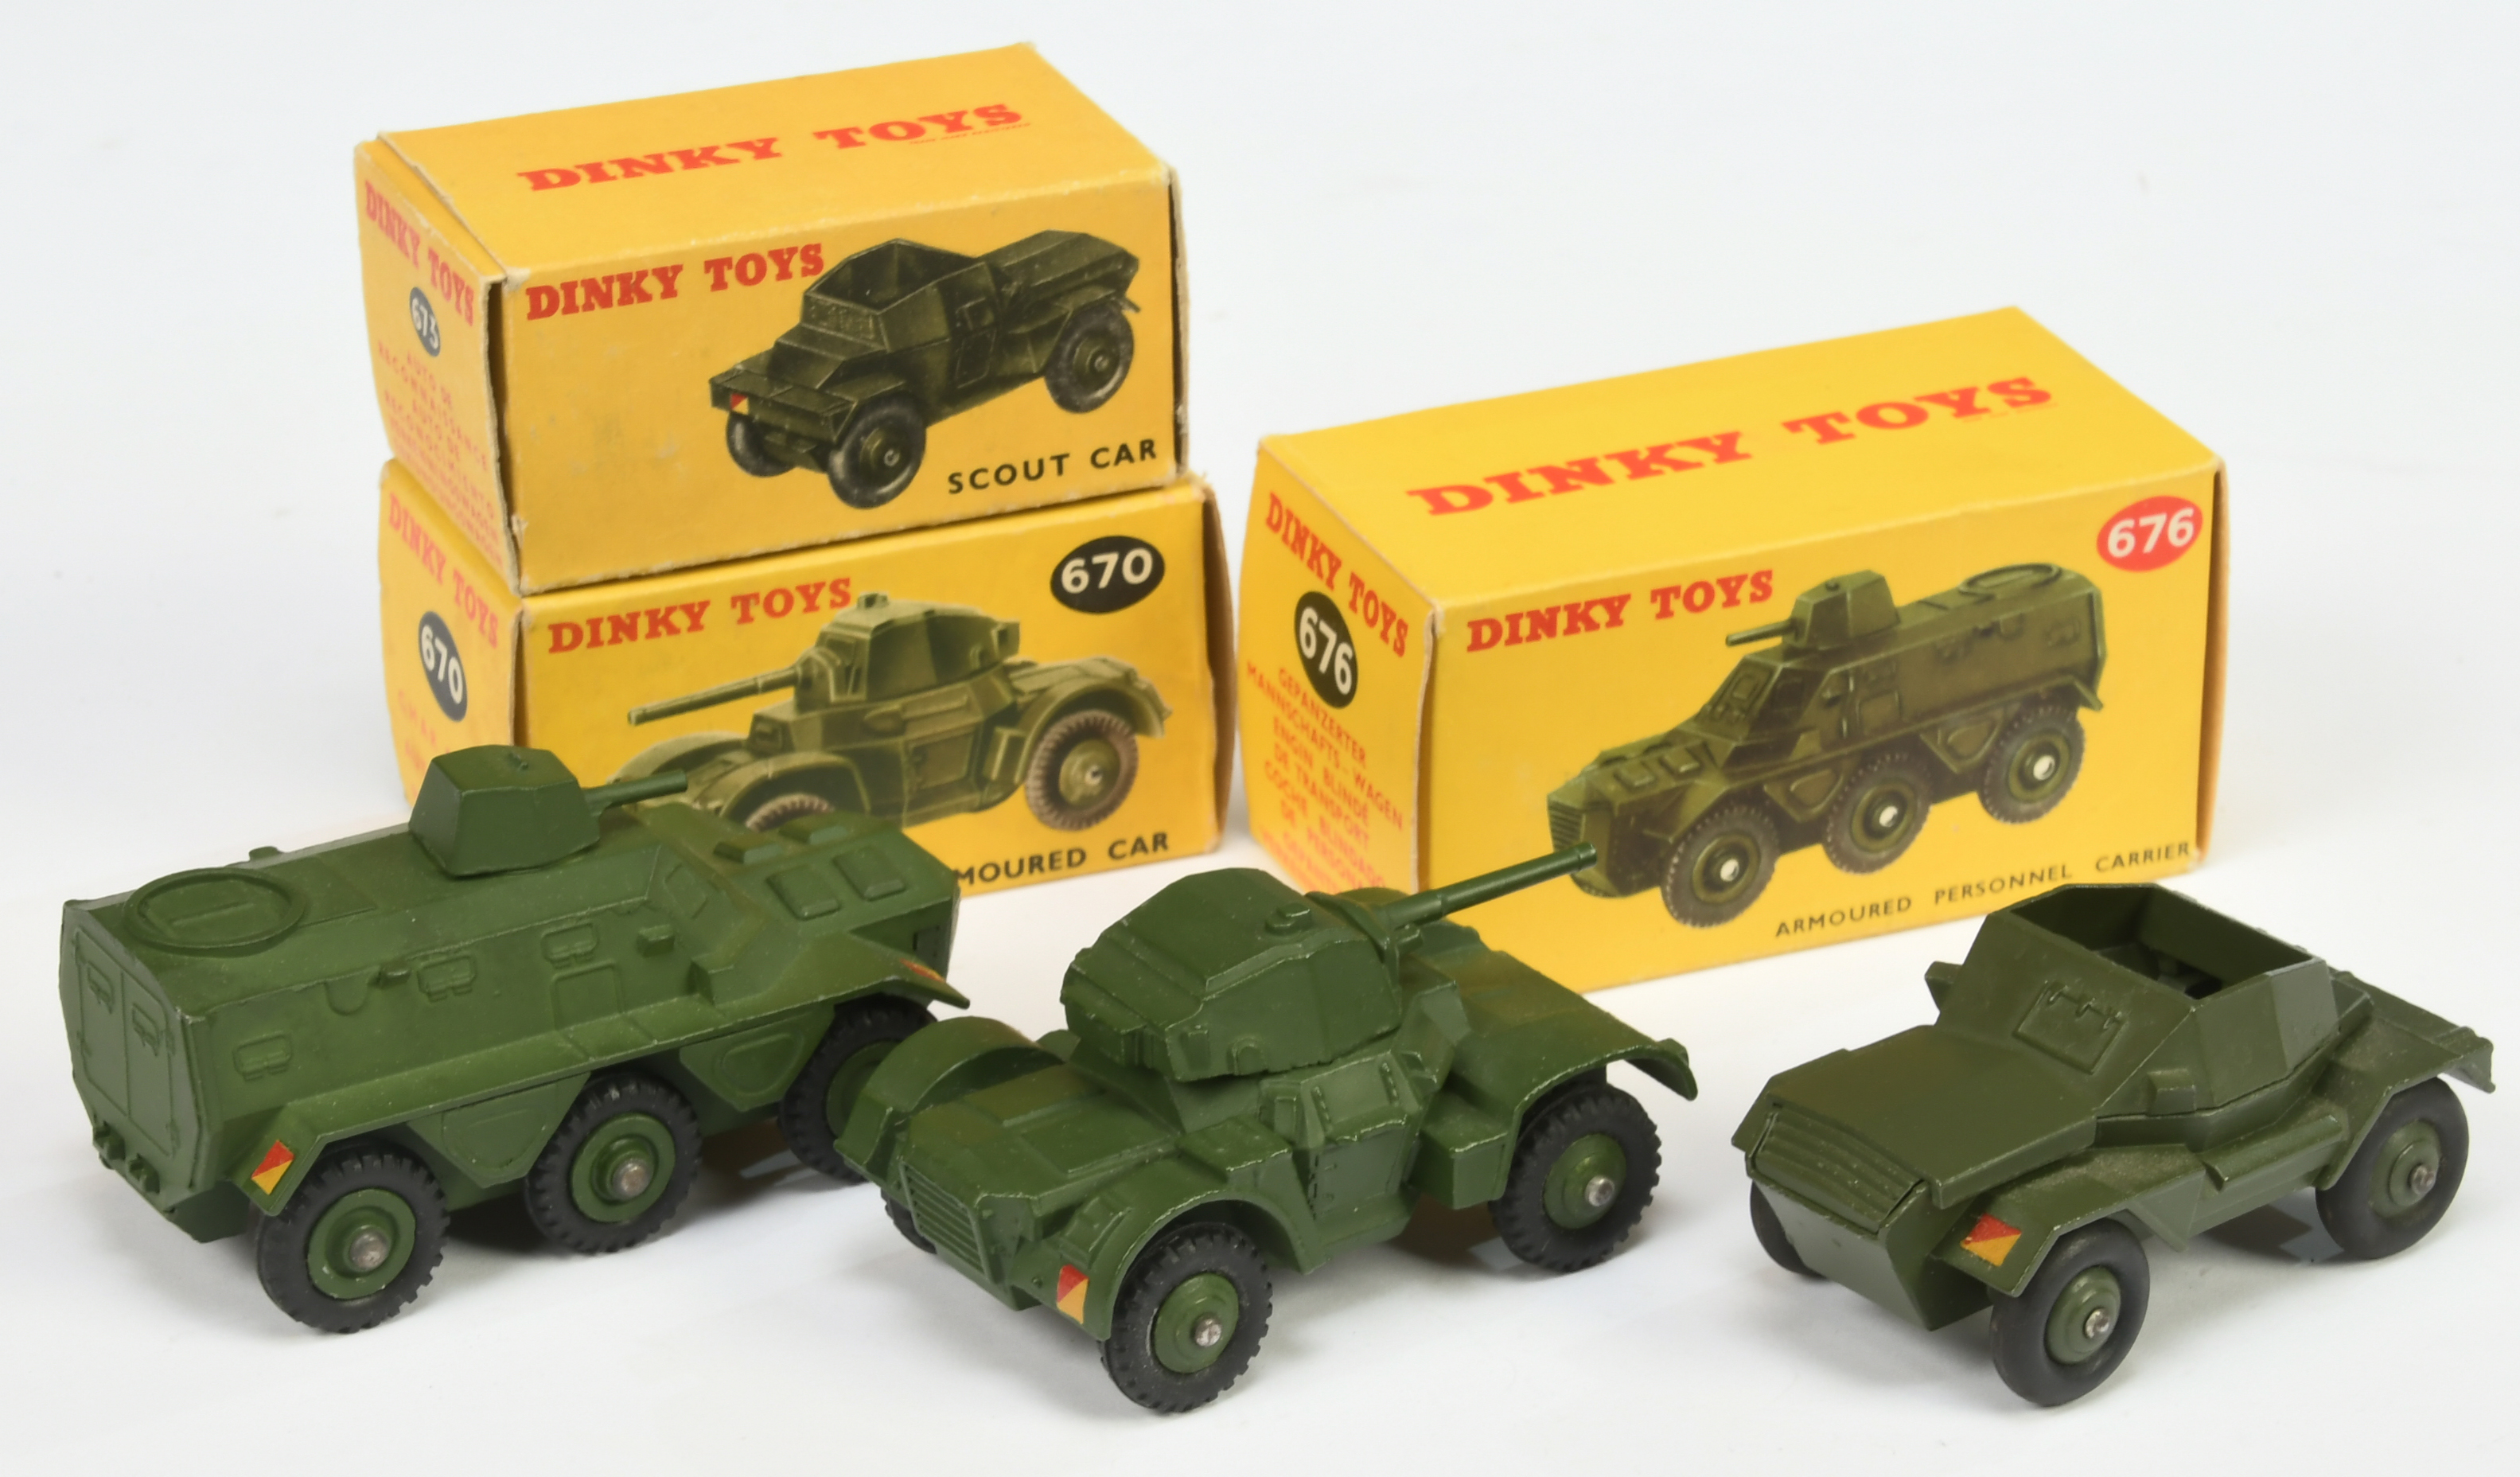 Dinky Toys Military Group Of 3 - (1) 670 Armoured Car, (2) 673 Scout Car and (3) 676 Armoured Per... - Image 2 of 2